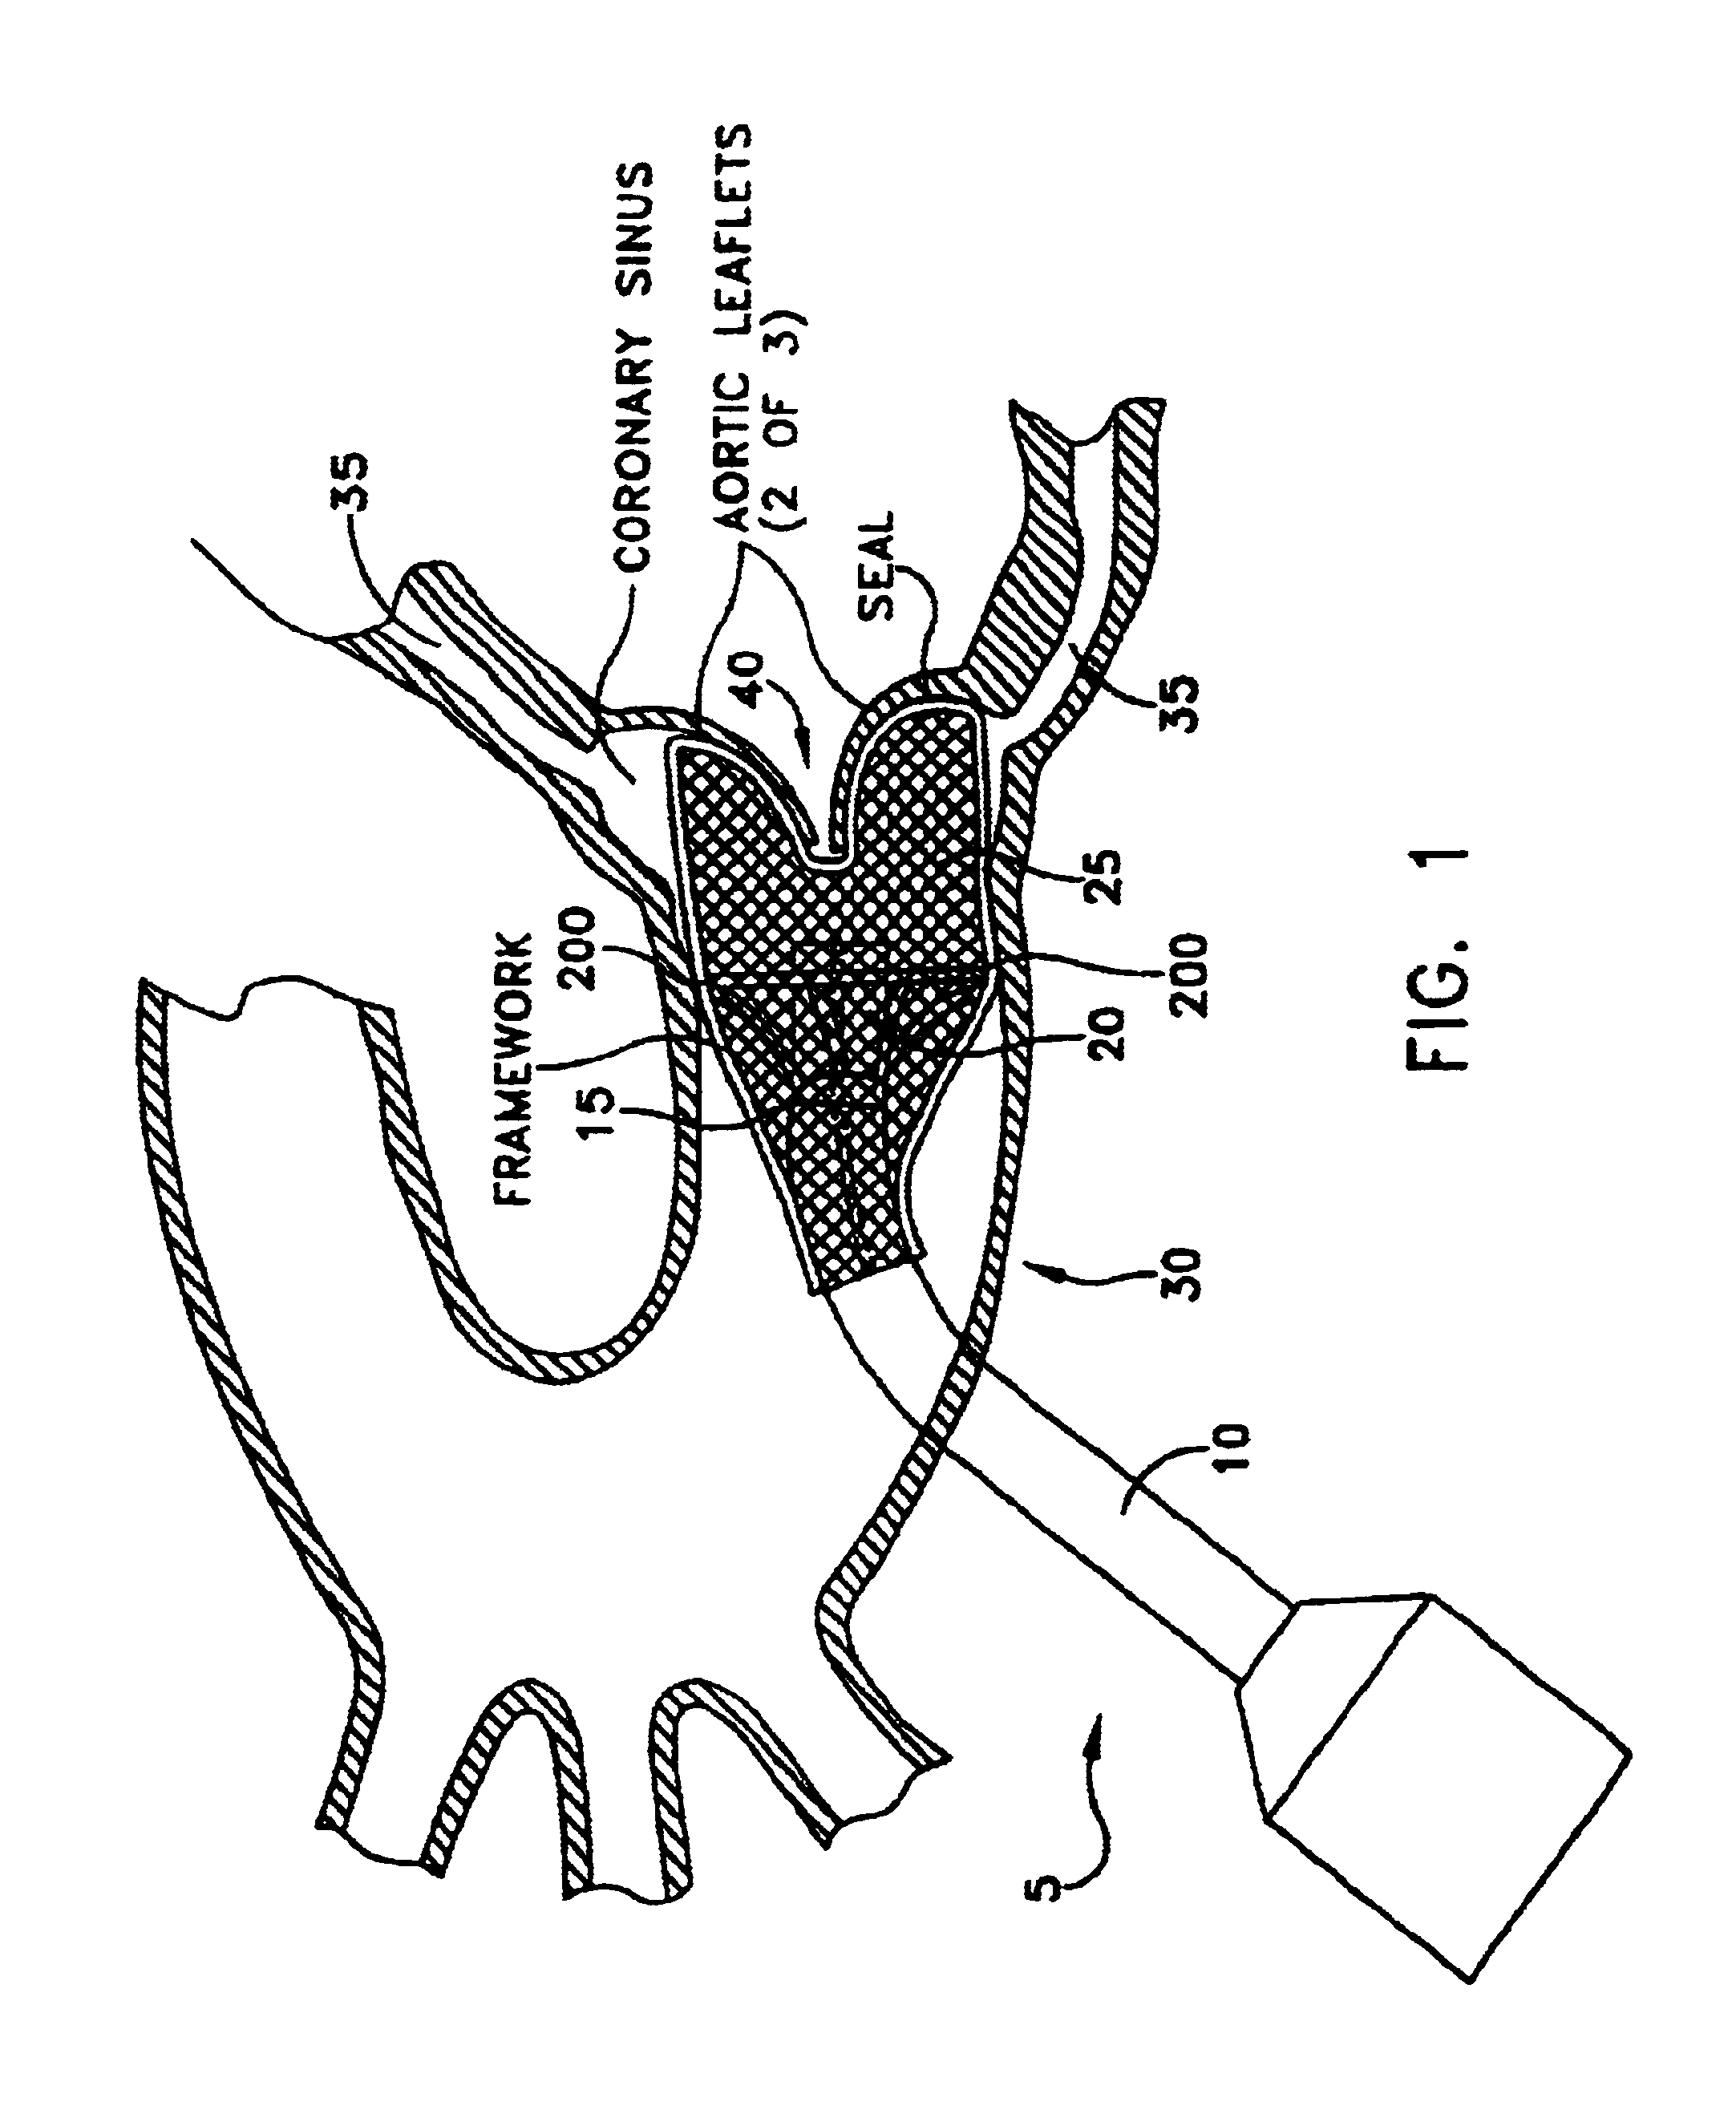 Apparatus and method for replacing aortic valve